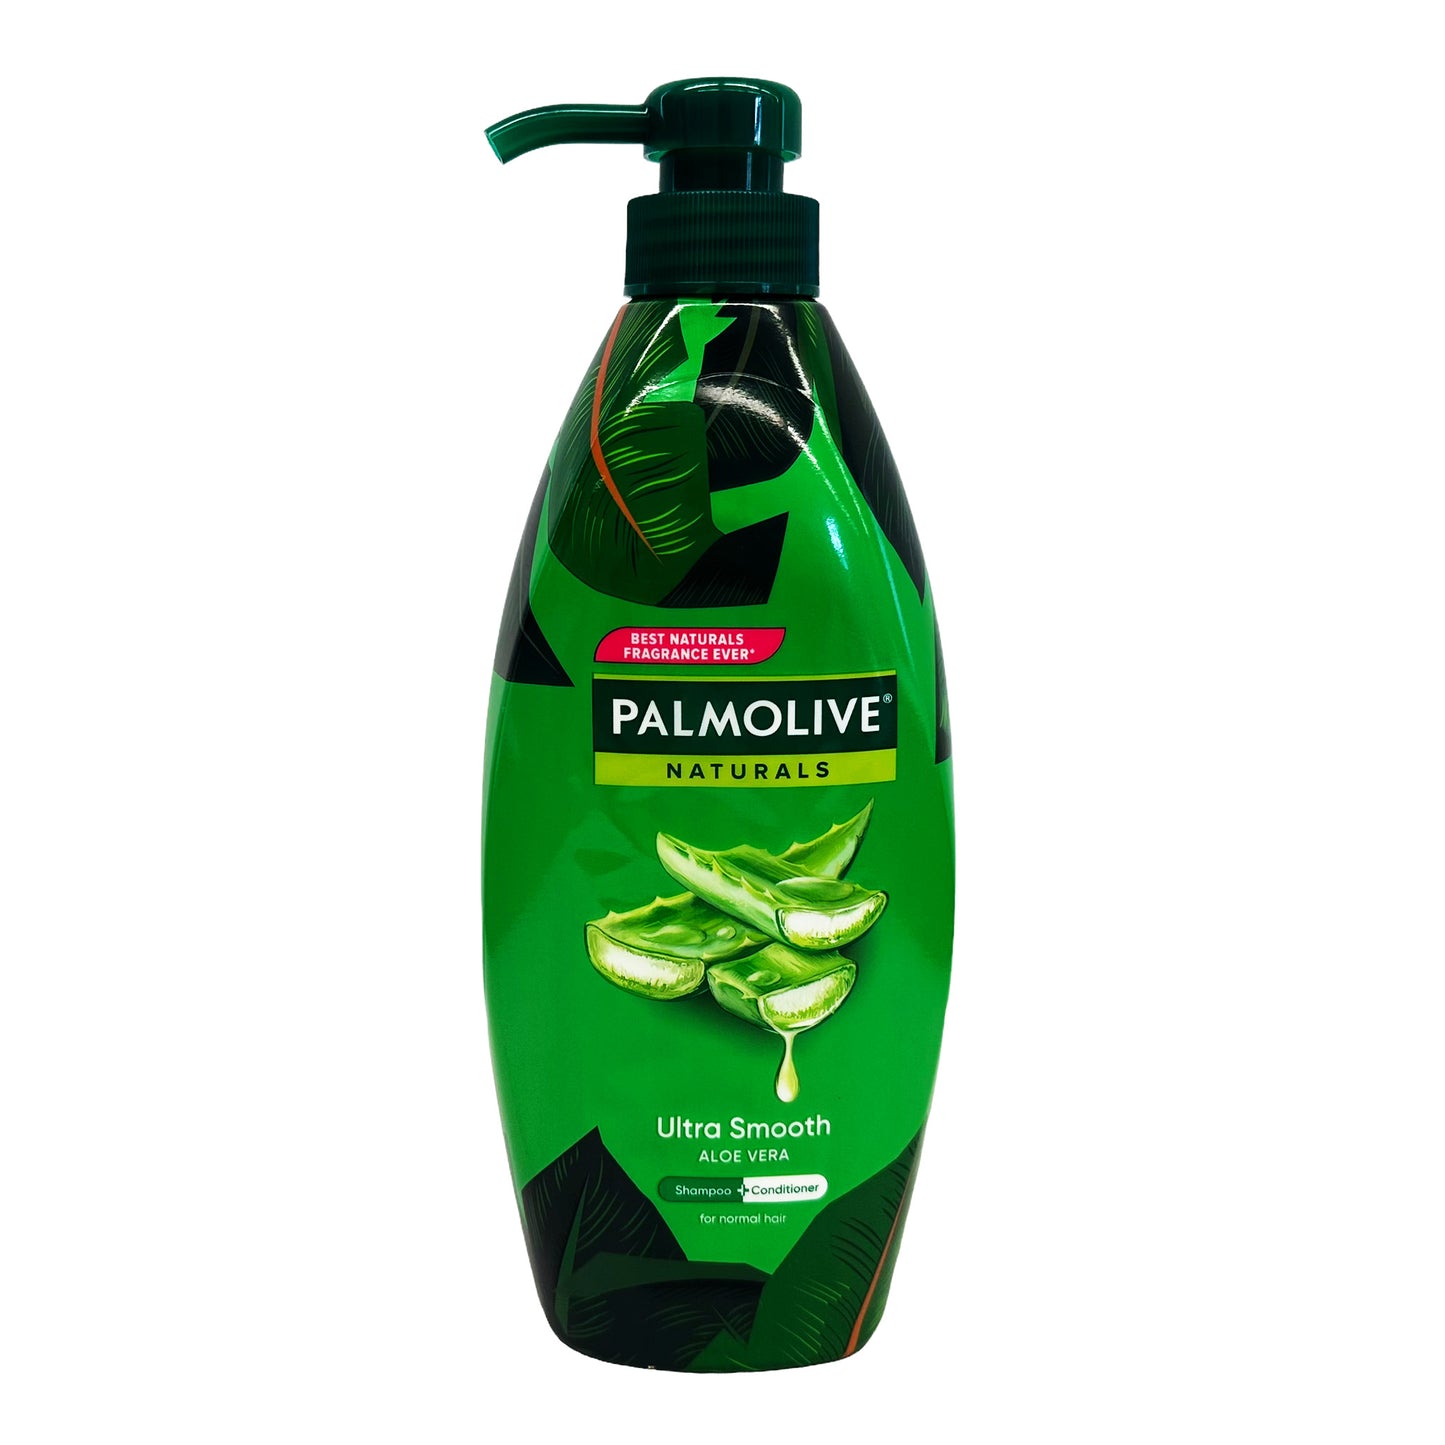 Front graphic image of Palmolive Naturals Ultra Smooth Shampoo And Conditioner (Green) 20.28oz (600ml)